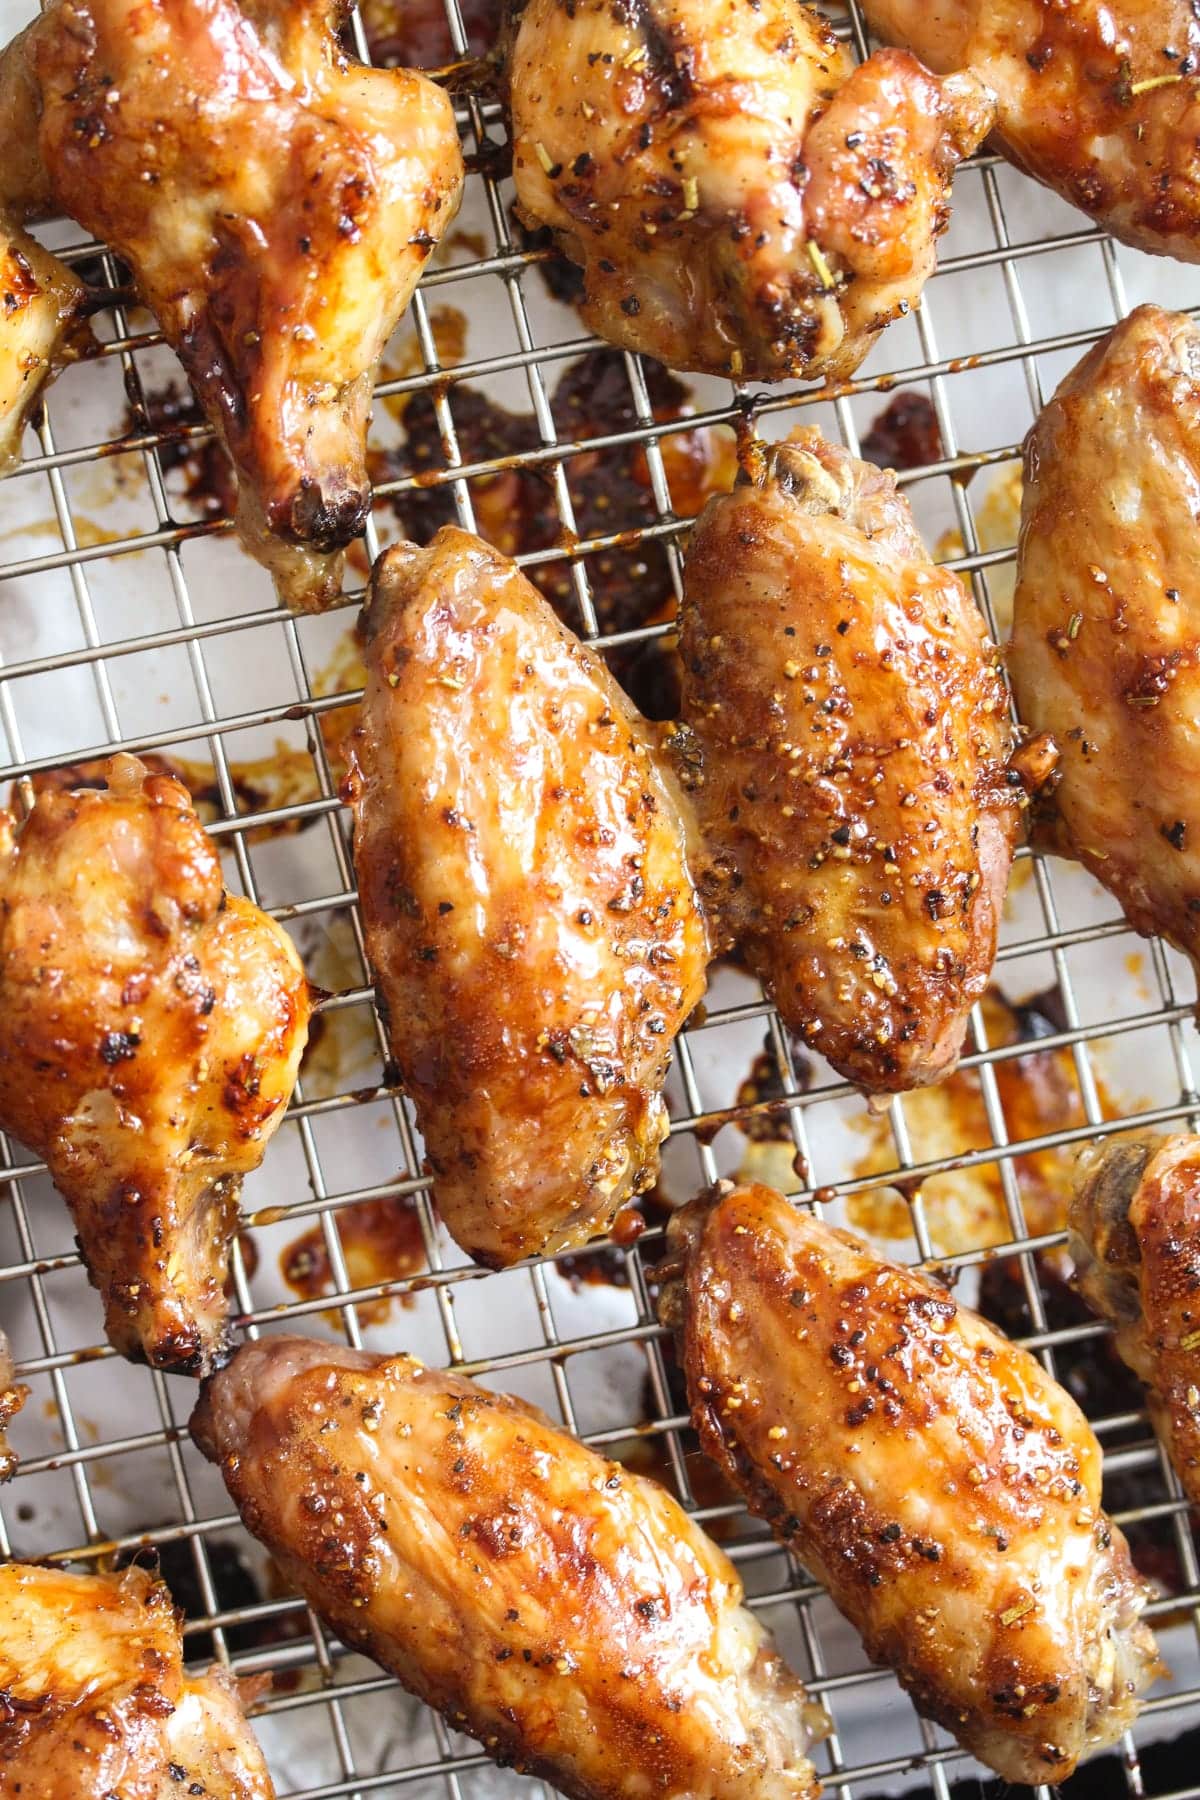 many golden brown baked wings cooked from frozen on a rack.